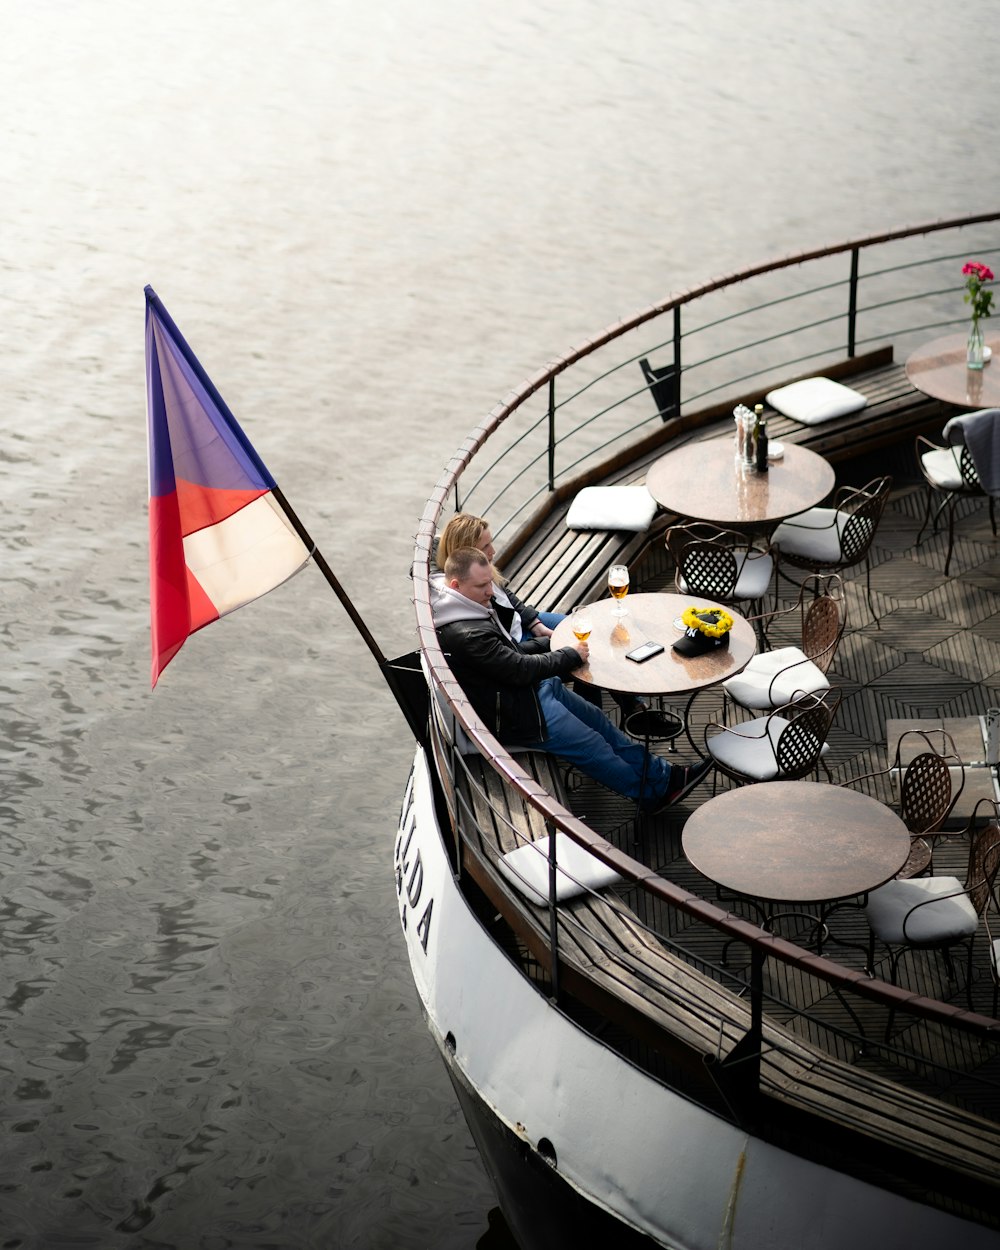 a person sitting on a boat with a flag